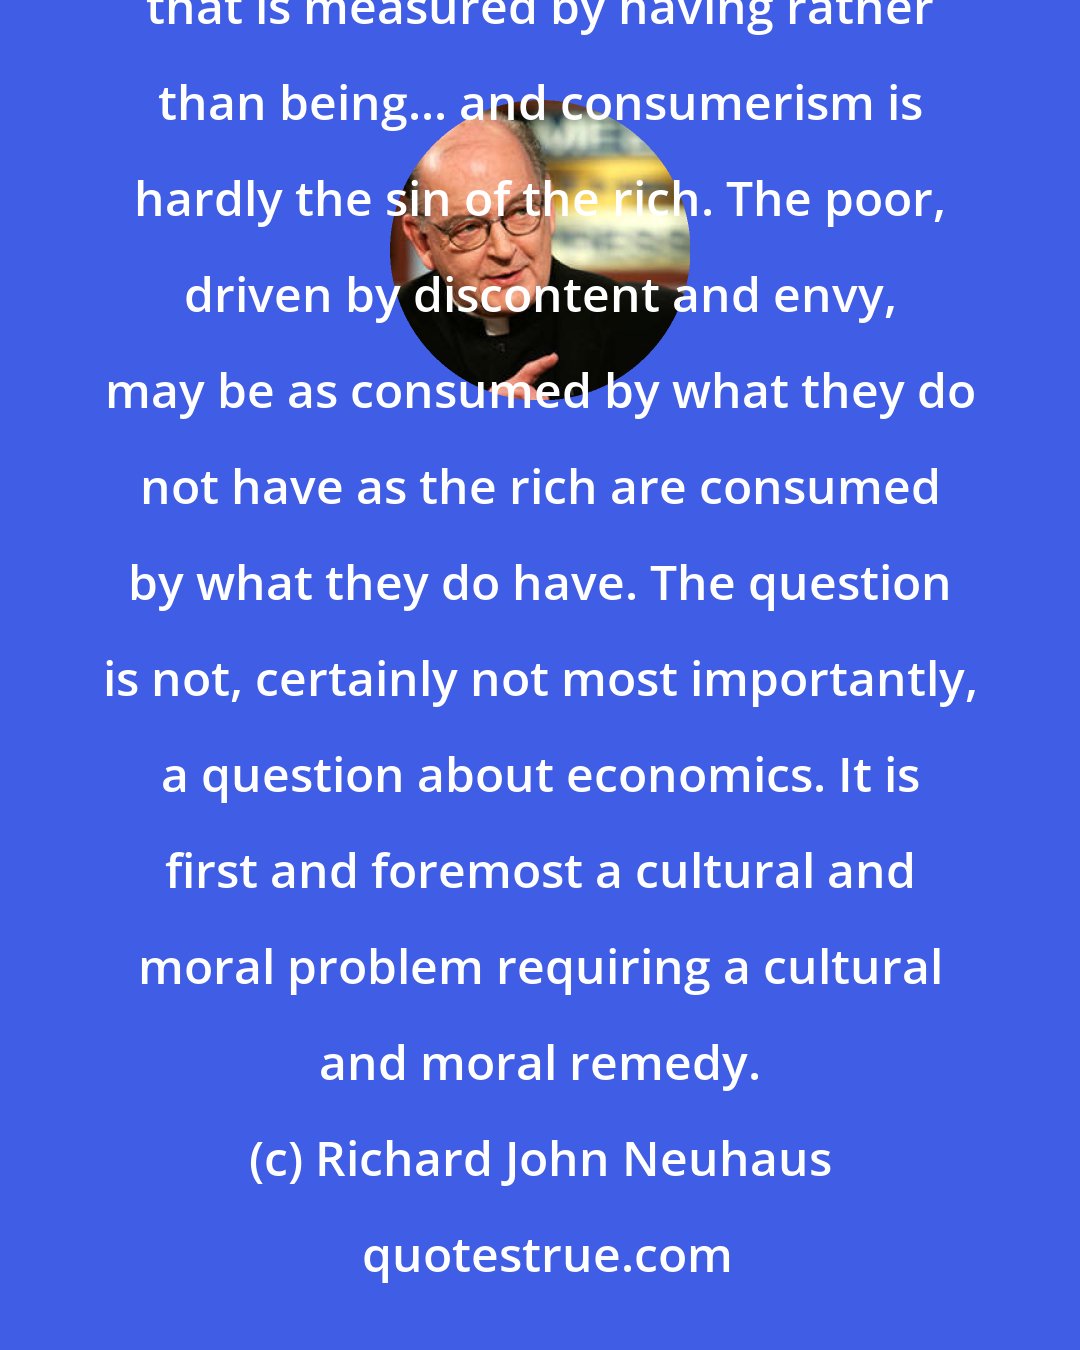 Richard John Neuhaus: Consumerism is, quite precisely, the consuming of life by the things consumed. It is living in a manner that is measured by having rather than being... and consumerism is hardly the sin of the rich. The poor, driven by discontent and envy, may be as consumed by what they do not have as the rich are consumed by what they do have. The question is not, certainly not most importantly, a question about economics. It is first and foremost a cultural and moral problem requiring a cultural and moral remedy.